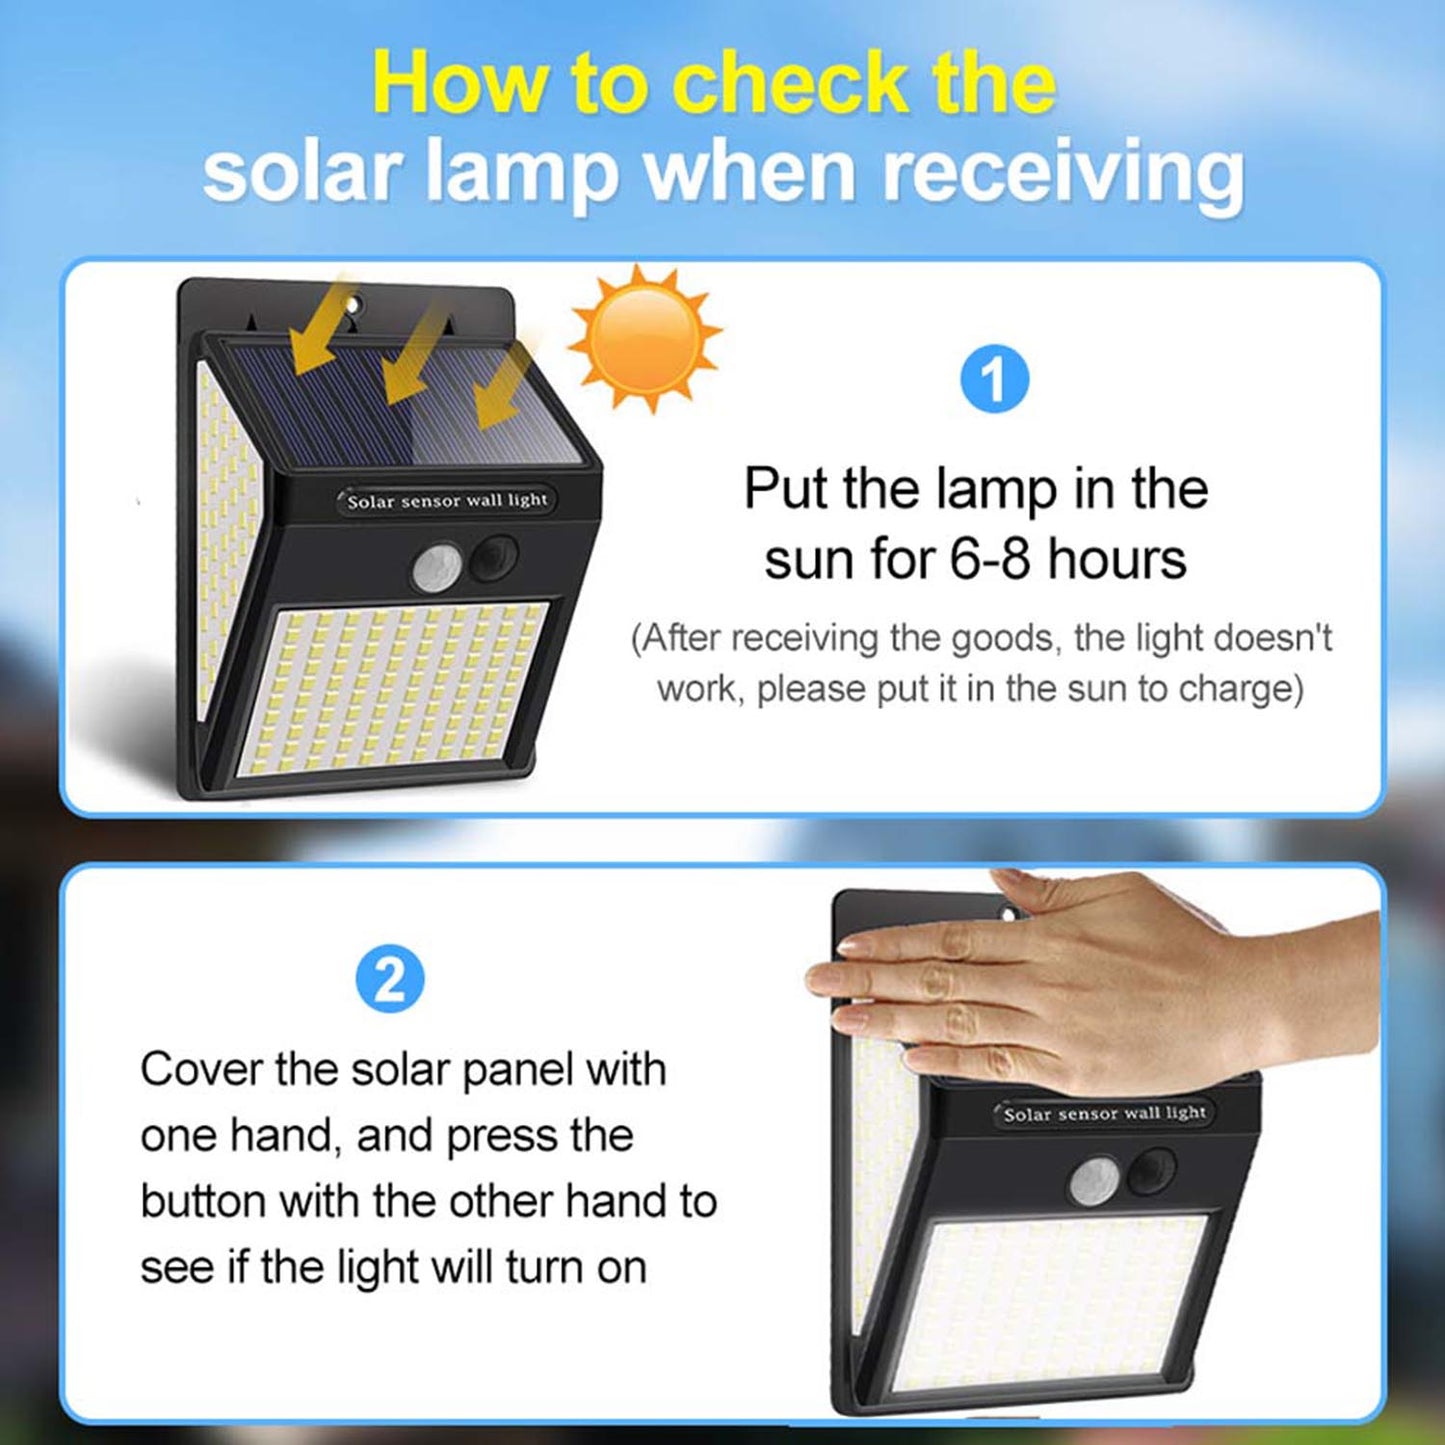 Outdoor LED Solar Light - Waterproof & Ultra-Bright for Garden, Patio, Yard, & More